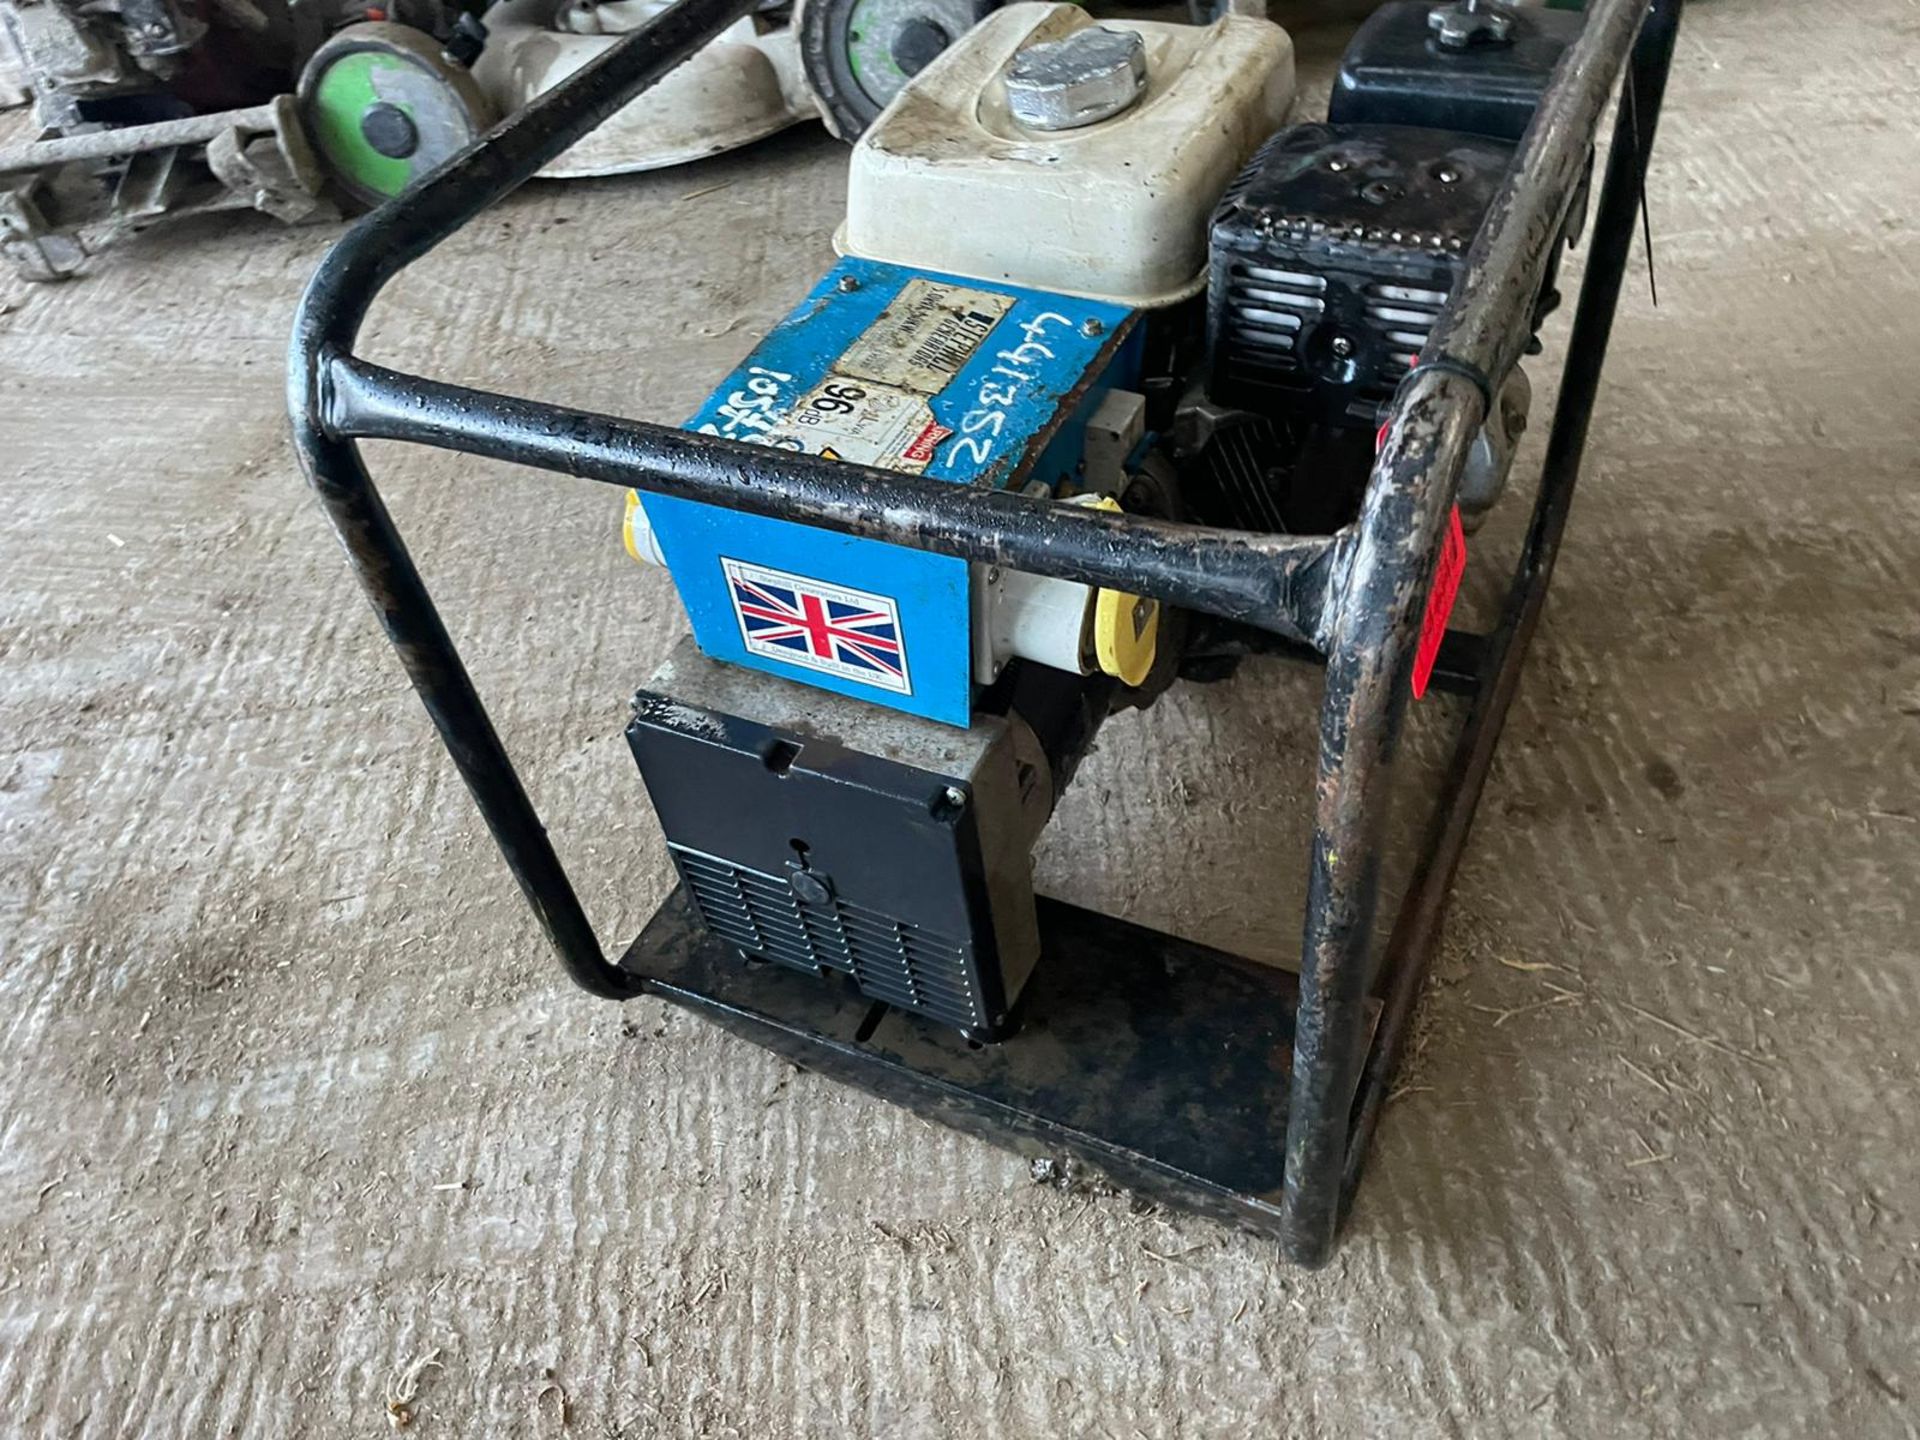 2015 STEPHILL SE5000EC 5KvA PETROL GENERATOR, SOLD NEW IN 2017, RUNS AND WORKS *NO VAT* - Image 3 of 7